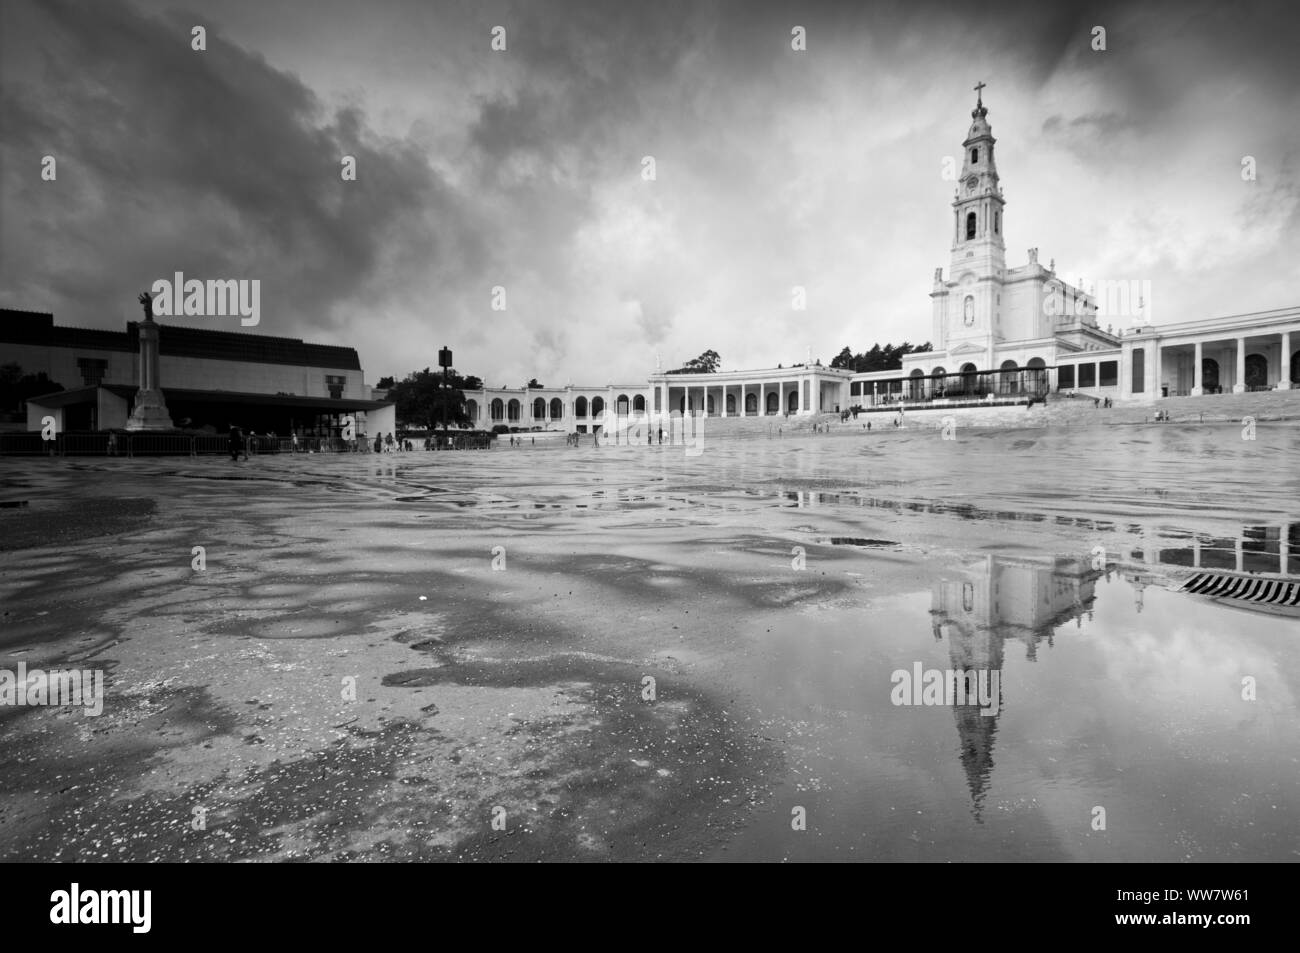 Fatima view with reflection on the water after the rain Stock Photo